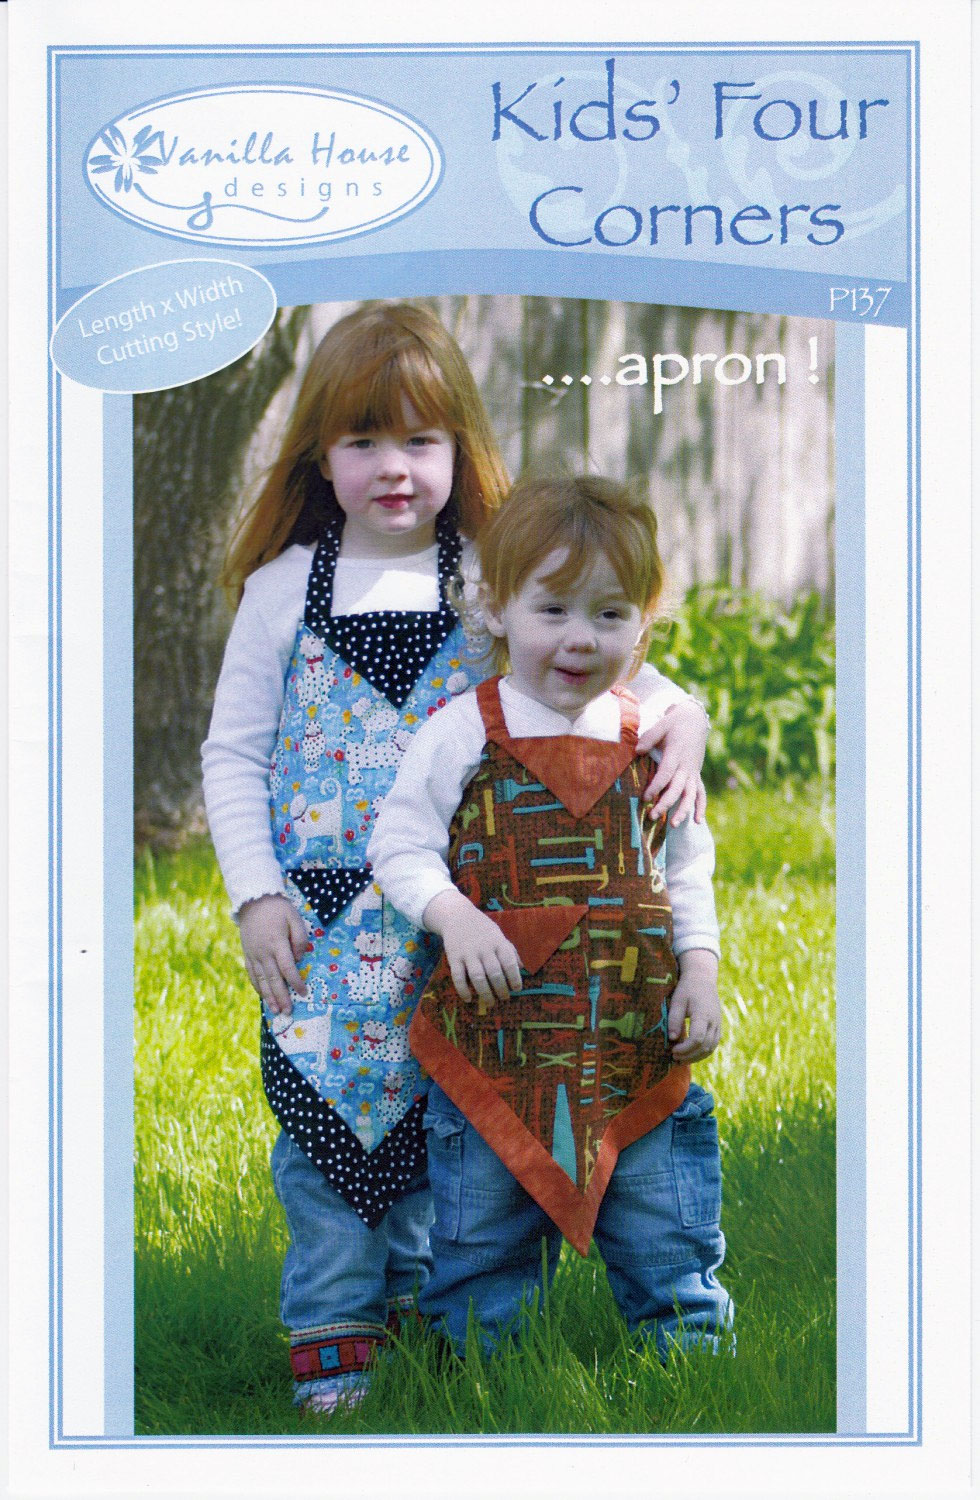 Kids-Four-Corners-Apron-sewing-pattern-Vanilla-House-Designs-front